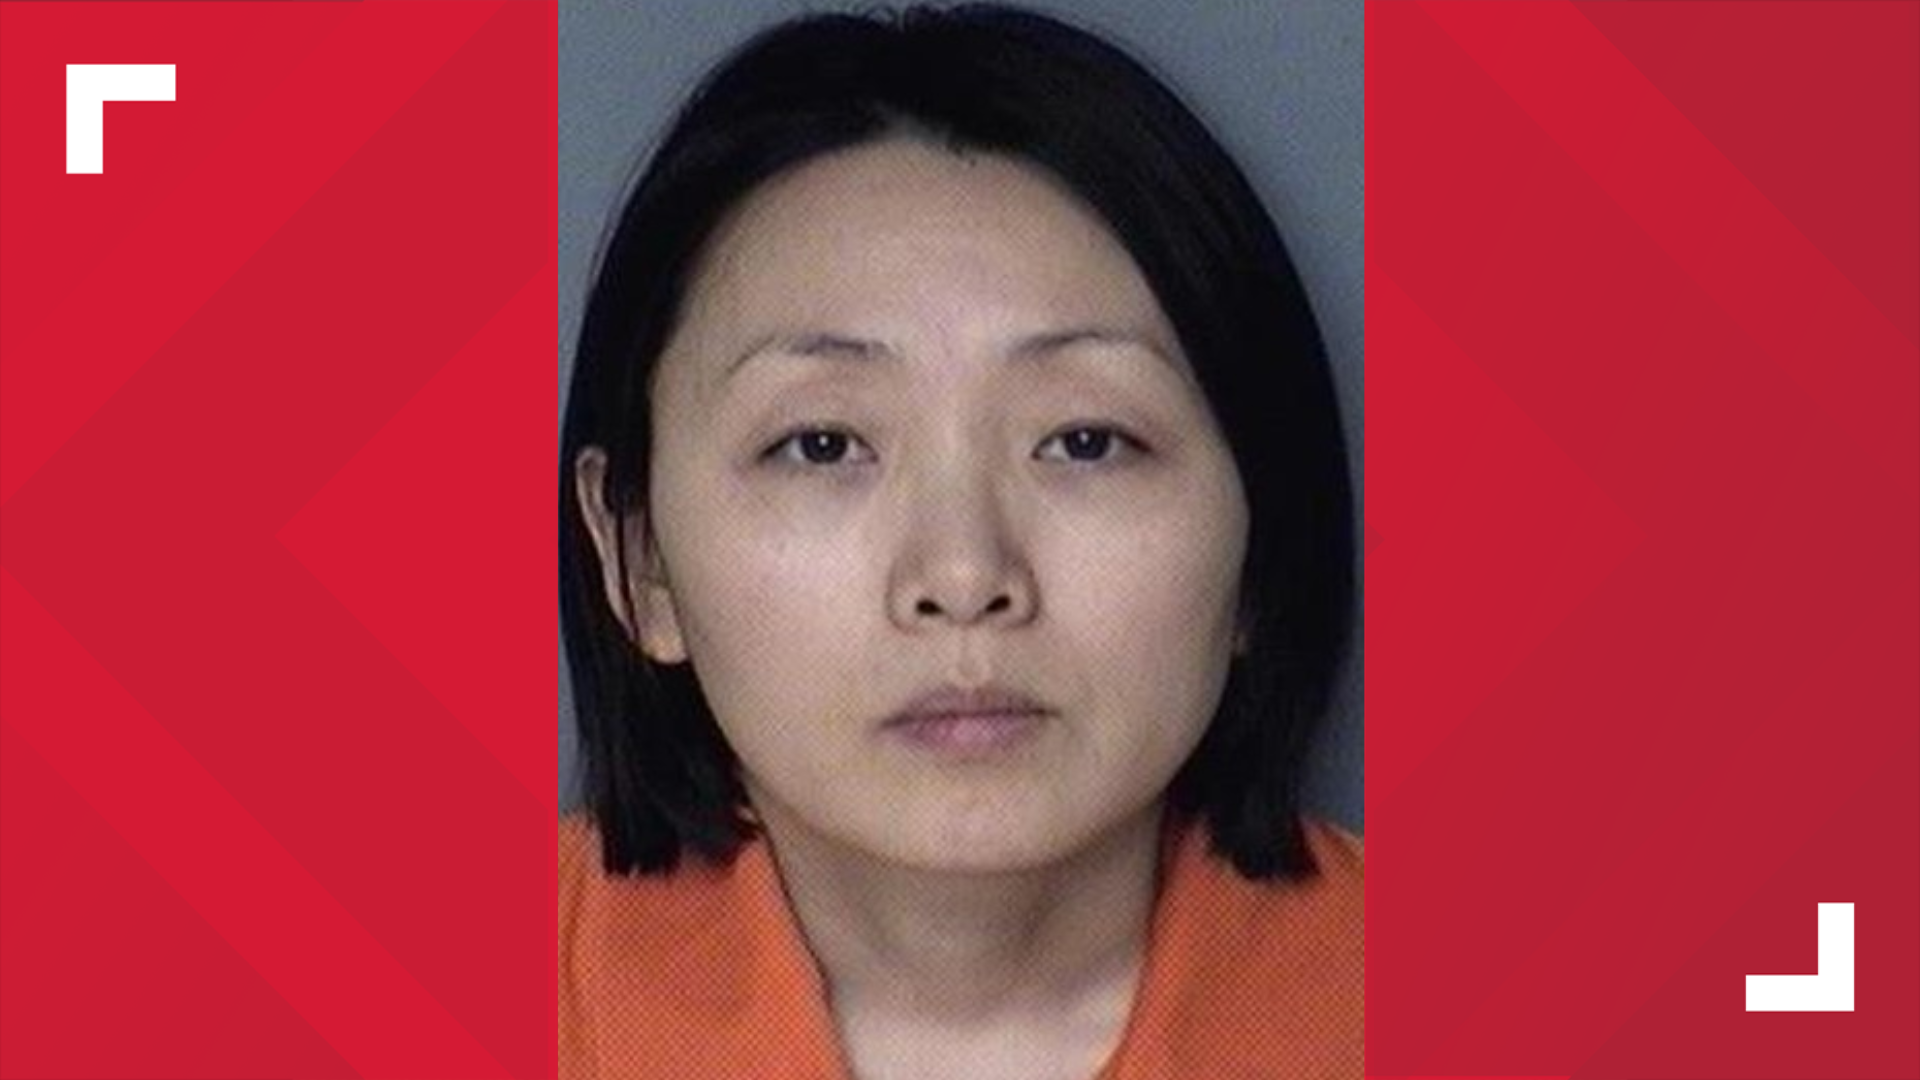 Gowun Park pleaded guilty to voluntary manslaughter, third-degree kidnapping and domestic abuse by assault.